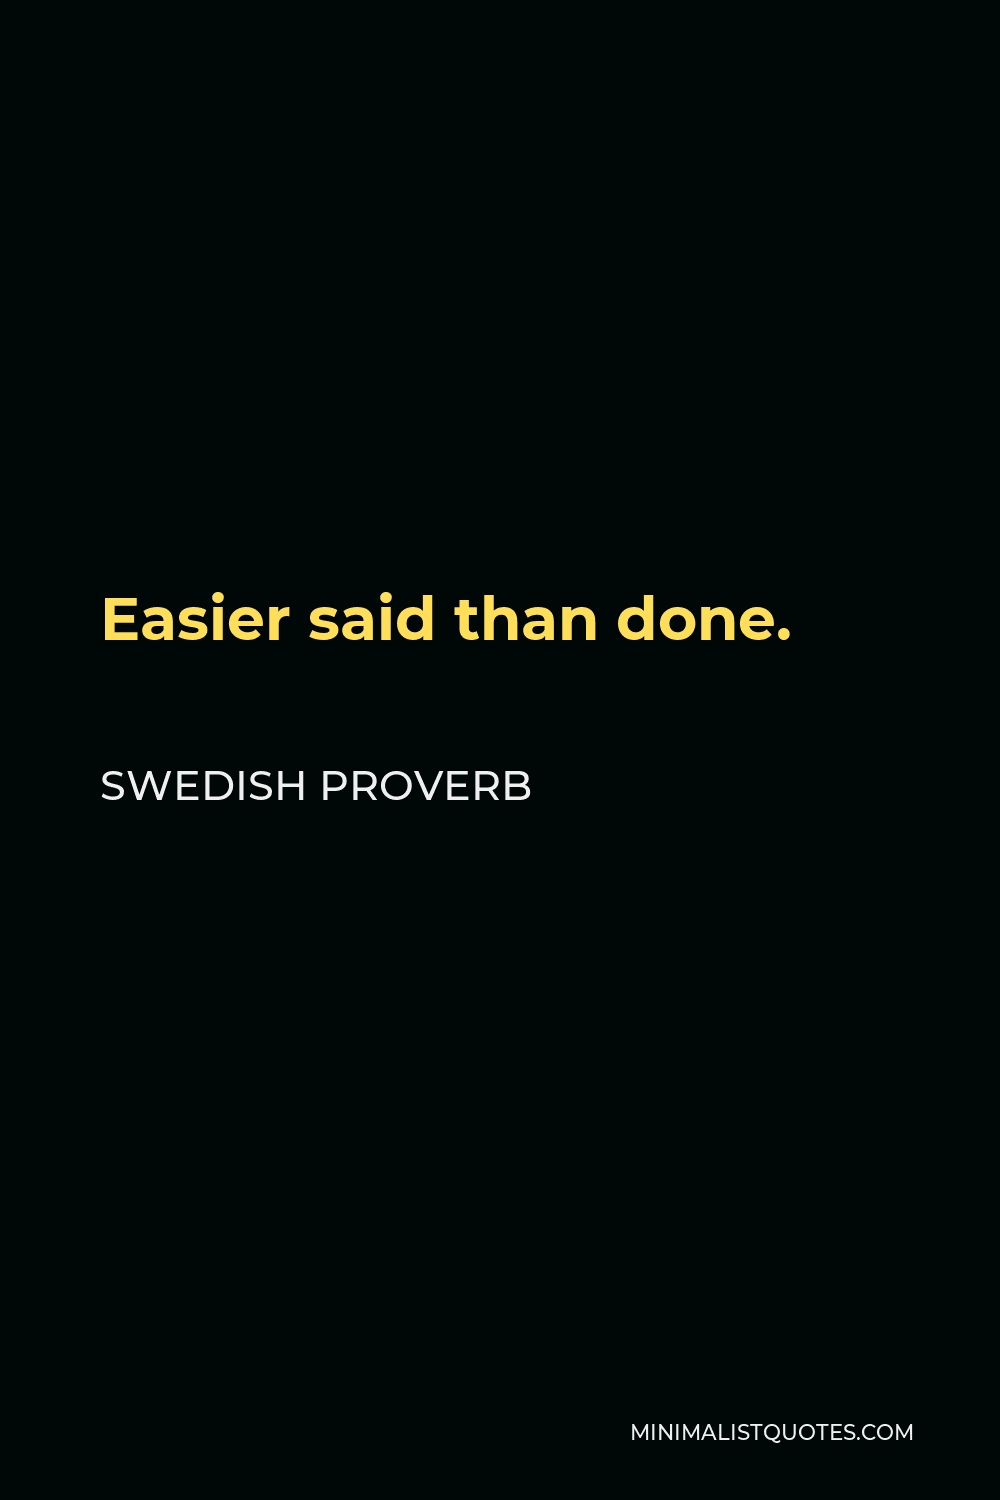 Swedish Proverb Quote - Easier said than done.